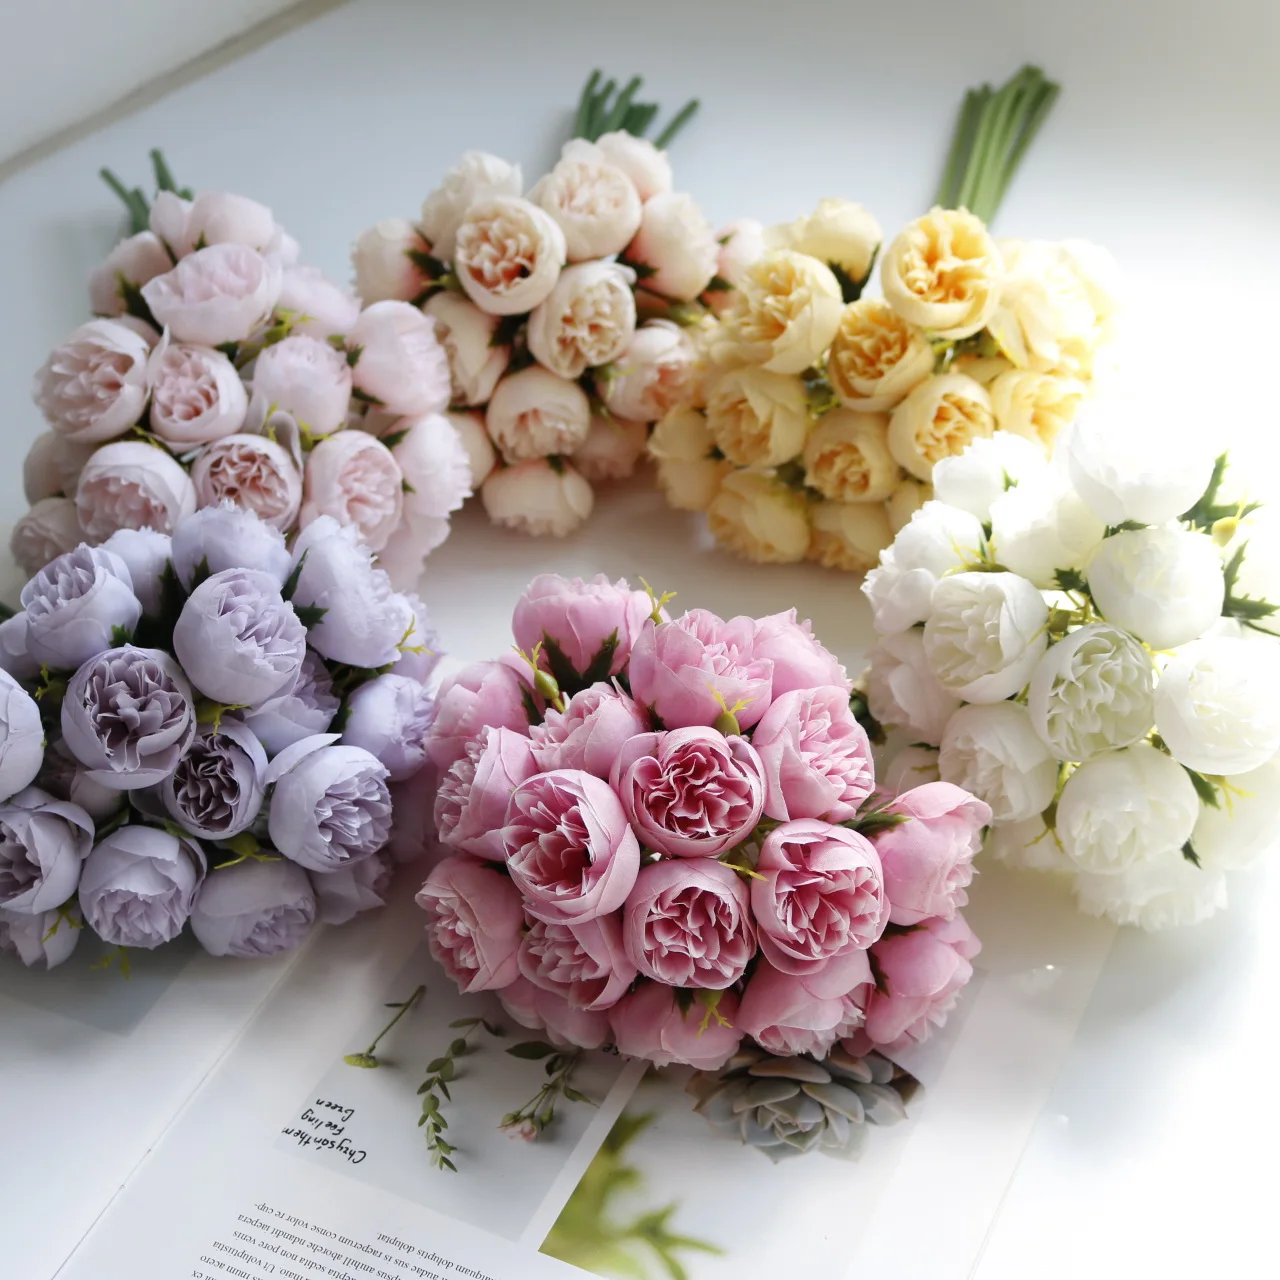 

27 Heads Small Tea Roses Artificial Flowers Fake Flowers Silk Roses Wedding Bridal Bouquet Table DIY Home Decor Faux Flores Rose